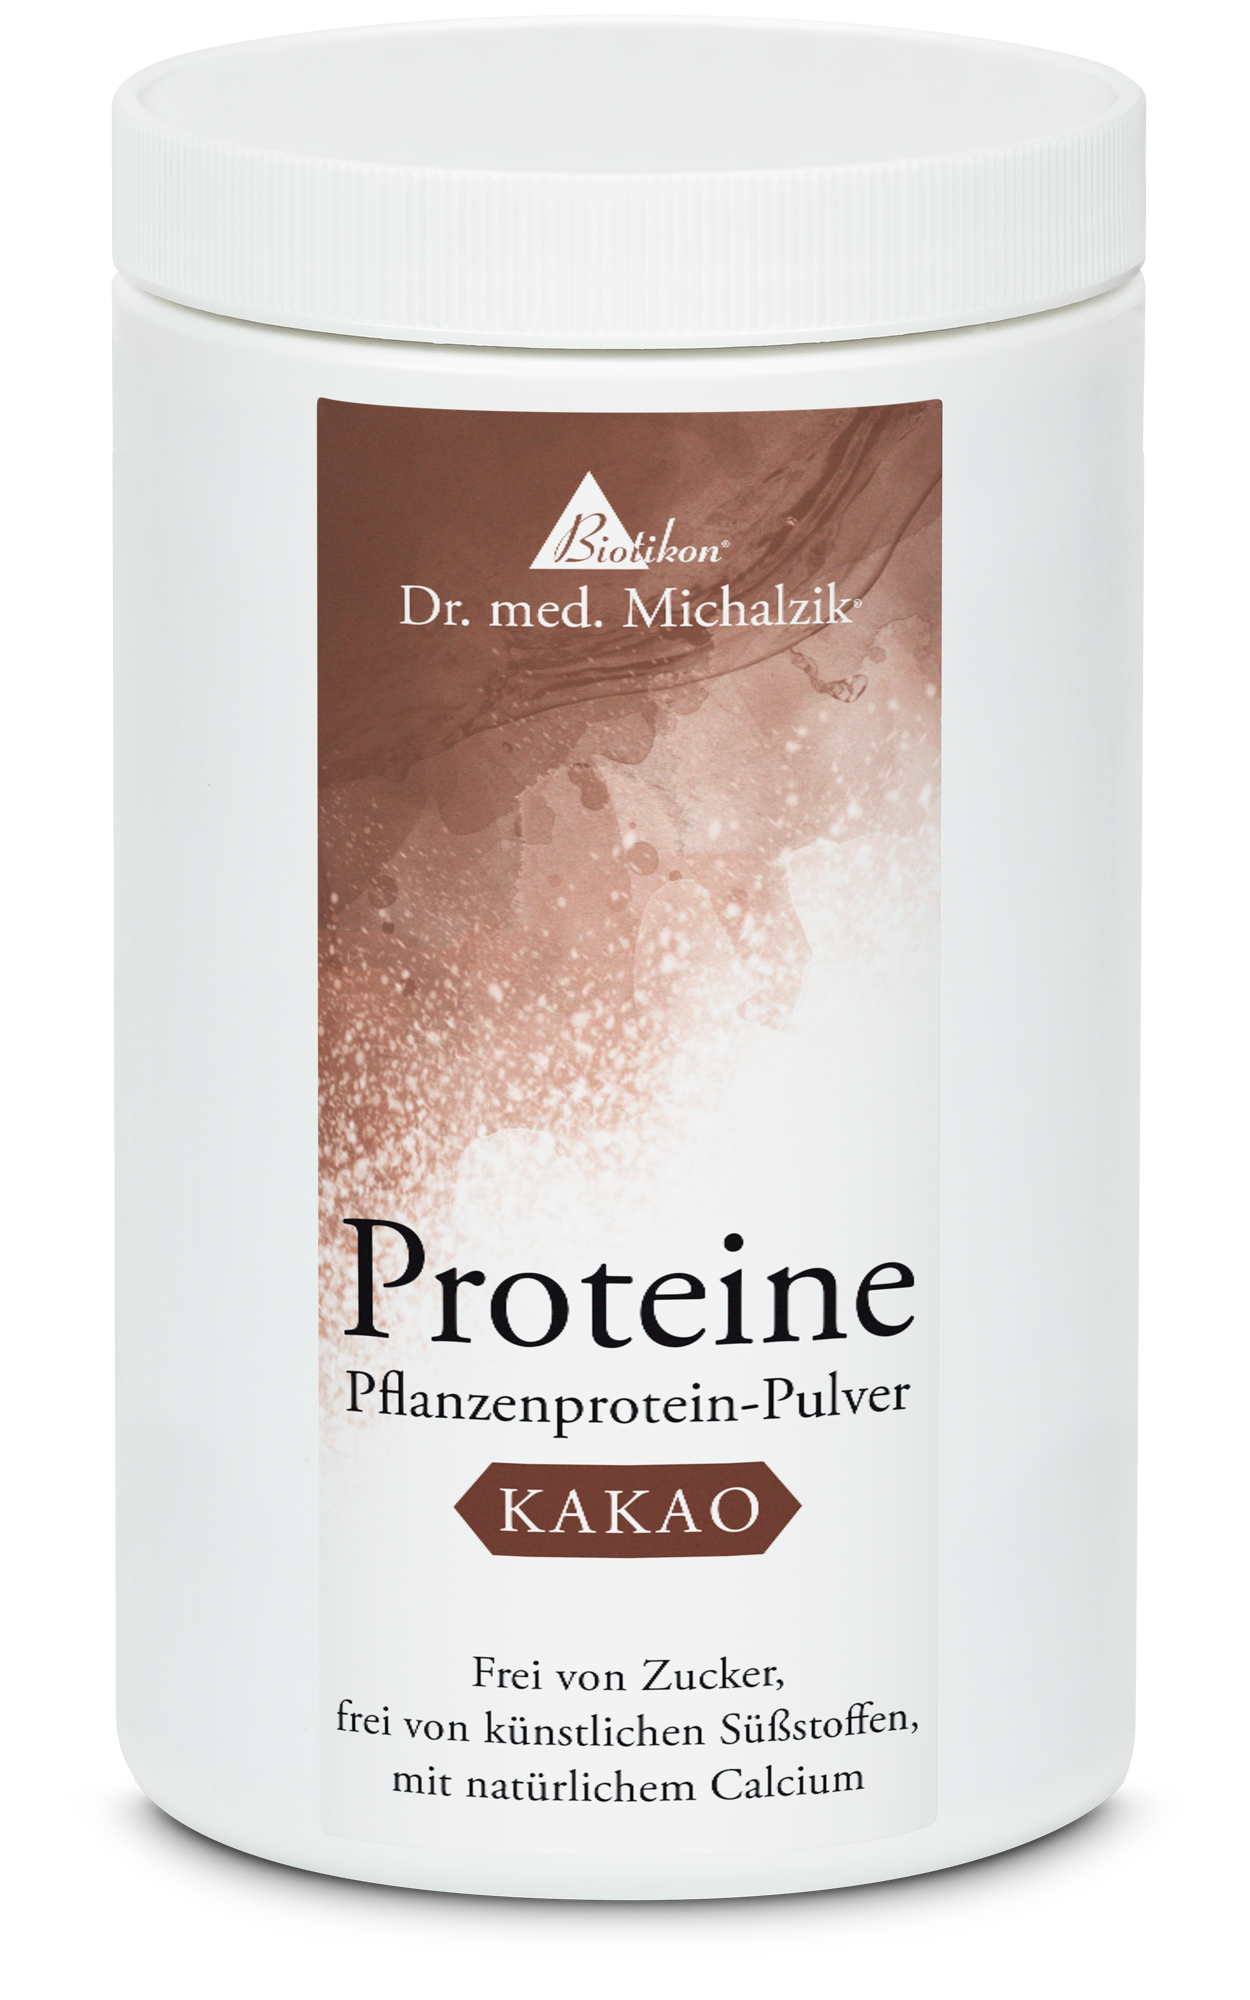 Protein - Cocoa flavour by Dr. med. Alexander Michalzik